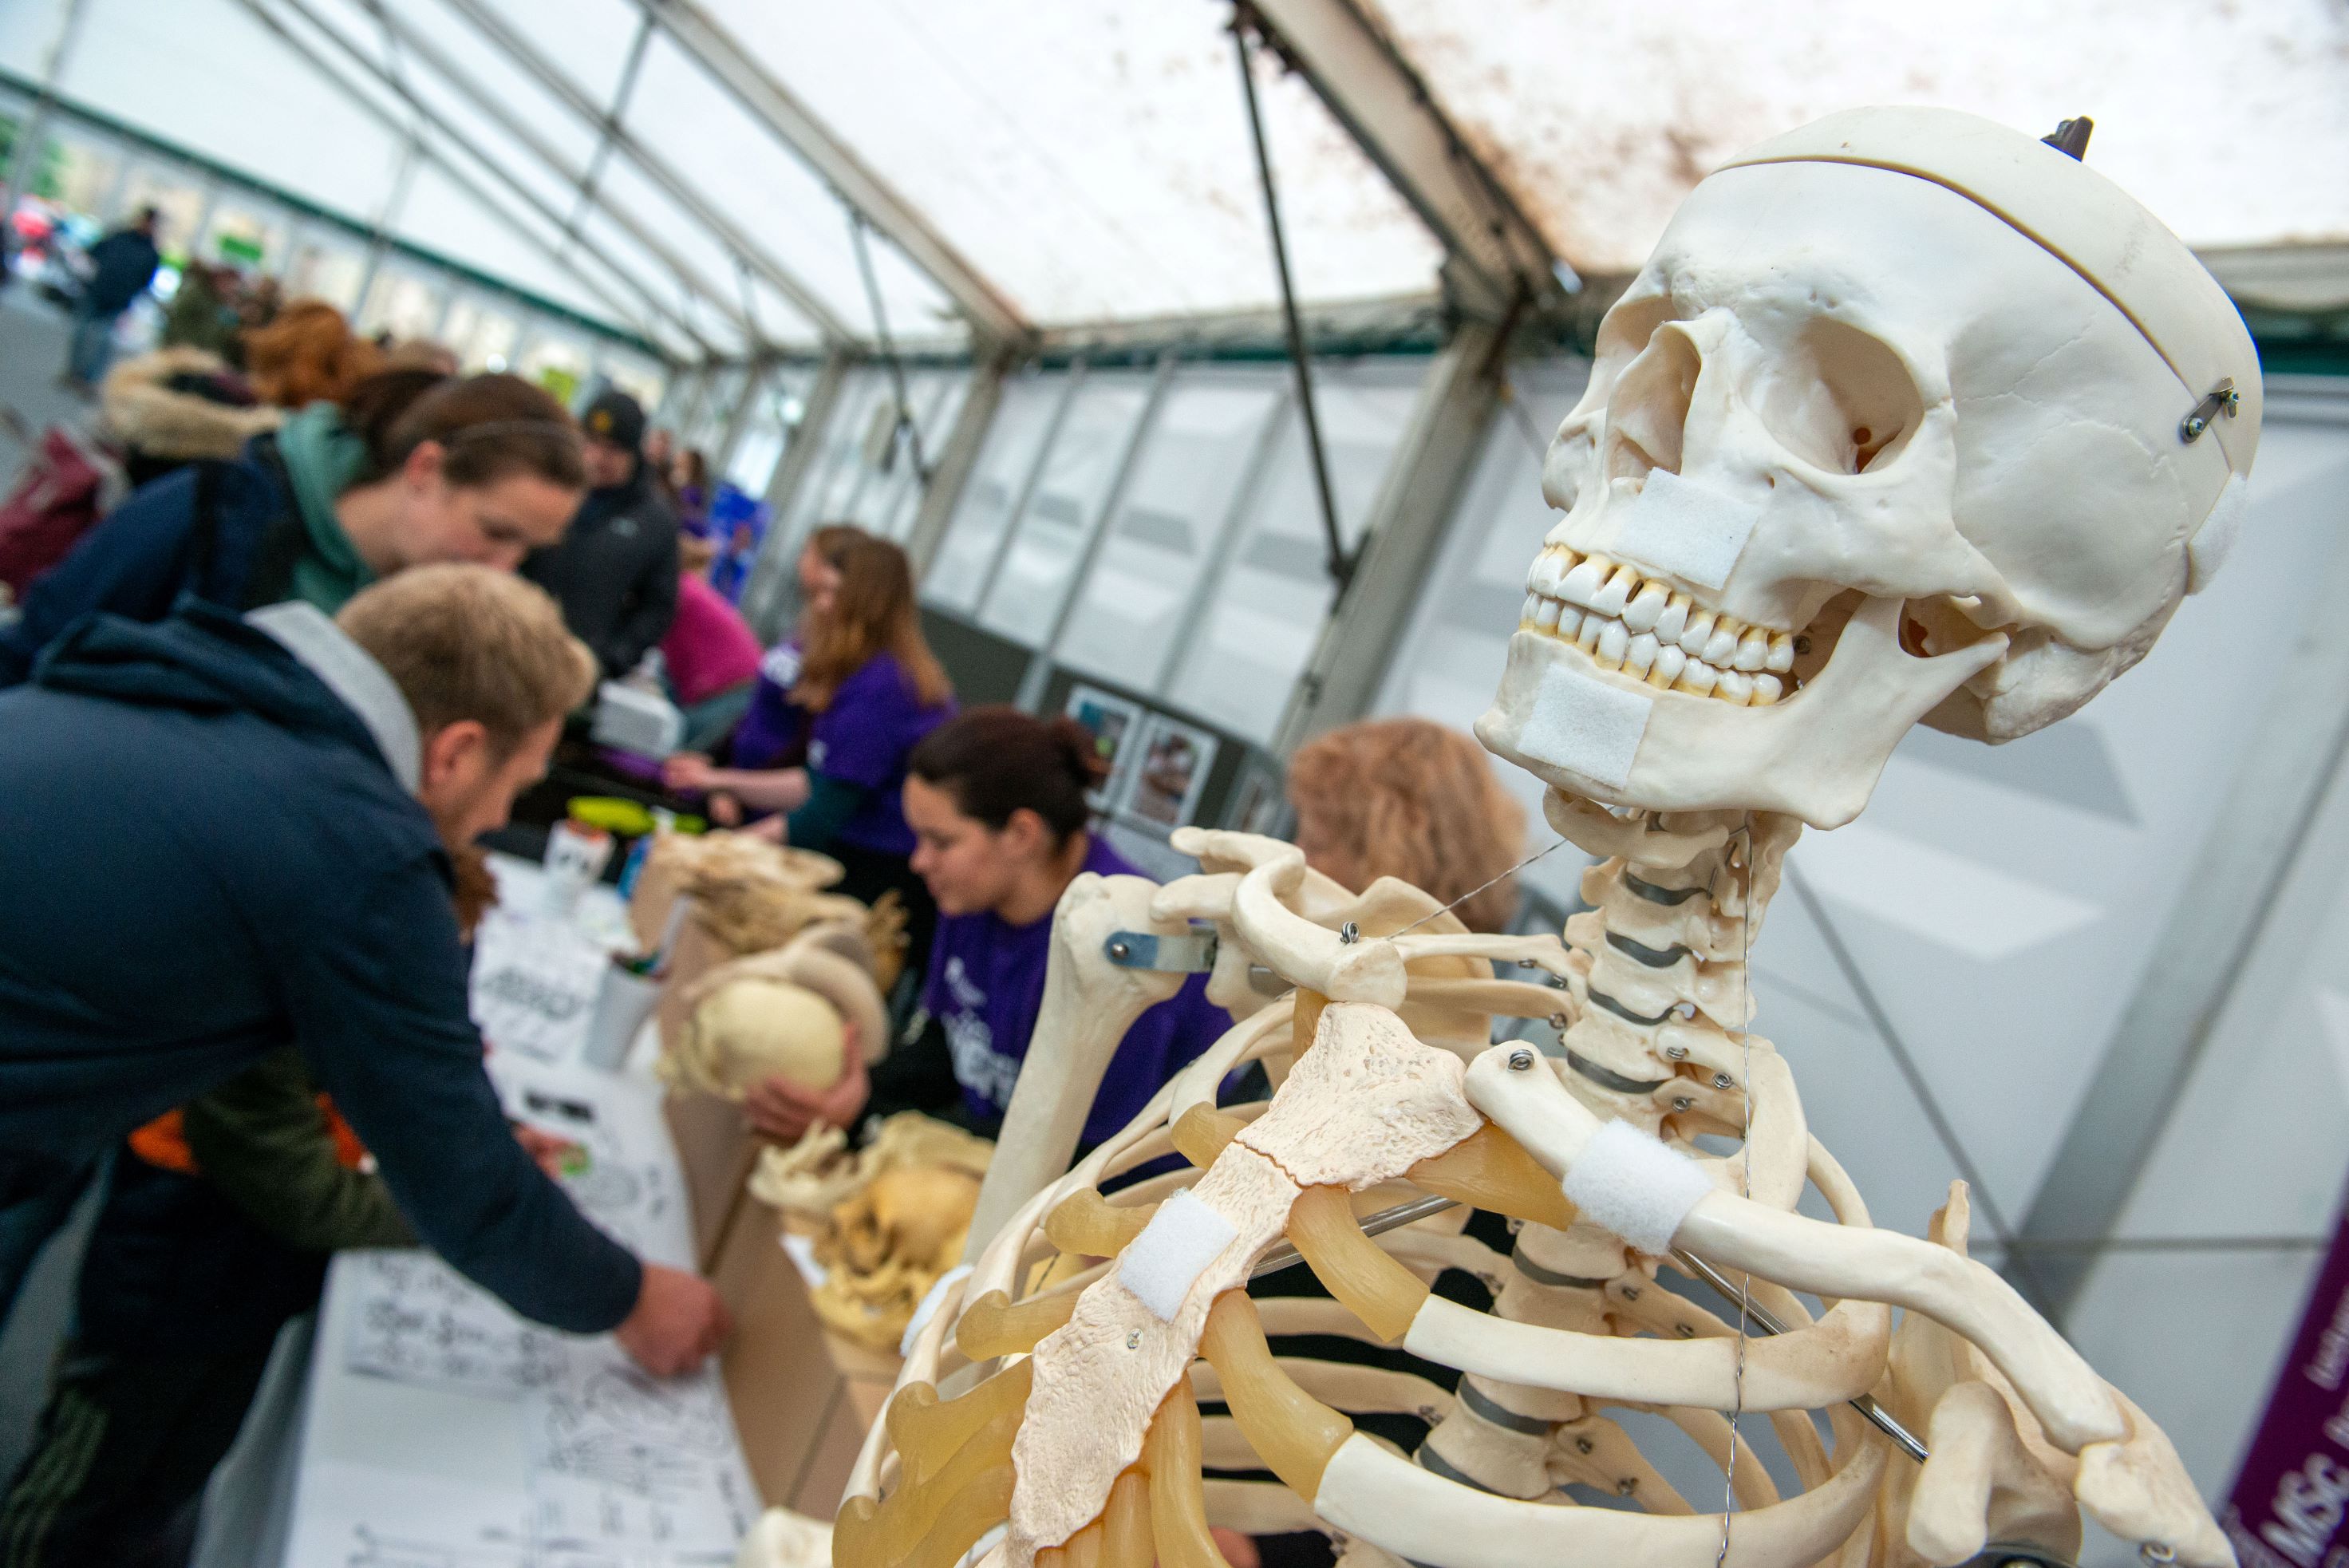 A plastic teaching skeleton is in the foreground with velcro patches ready for labels to be stuck on. In the background are some parents, children and volunteers talking about different human and animal skulls.